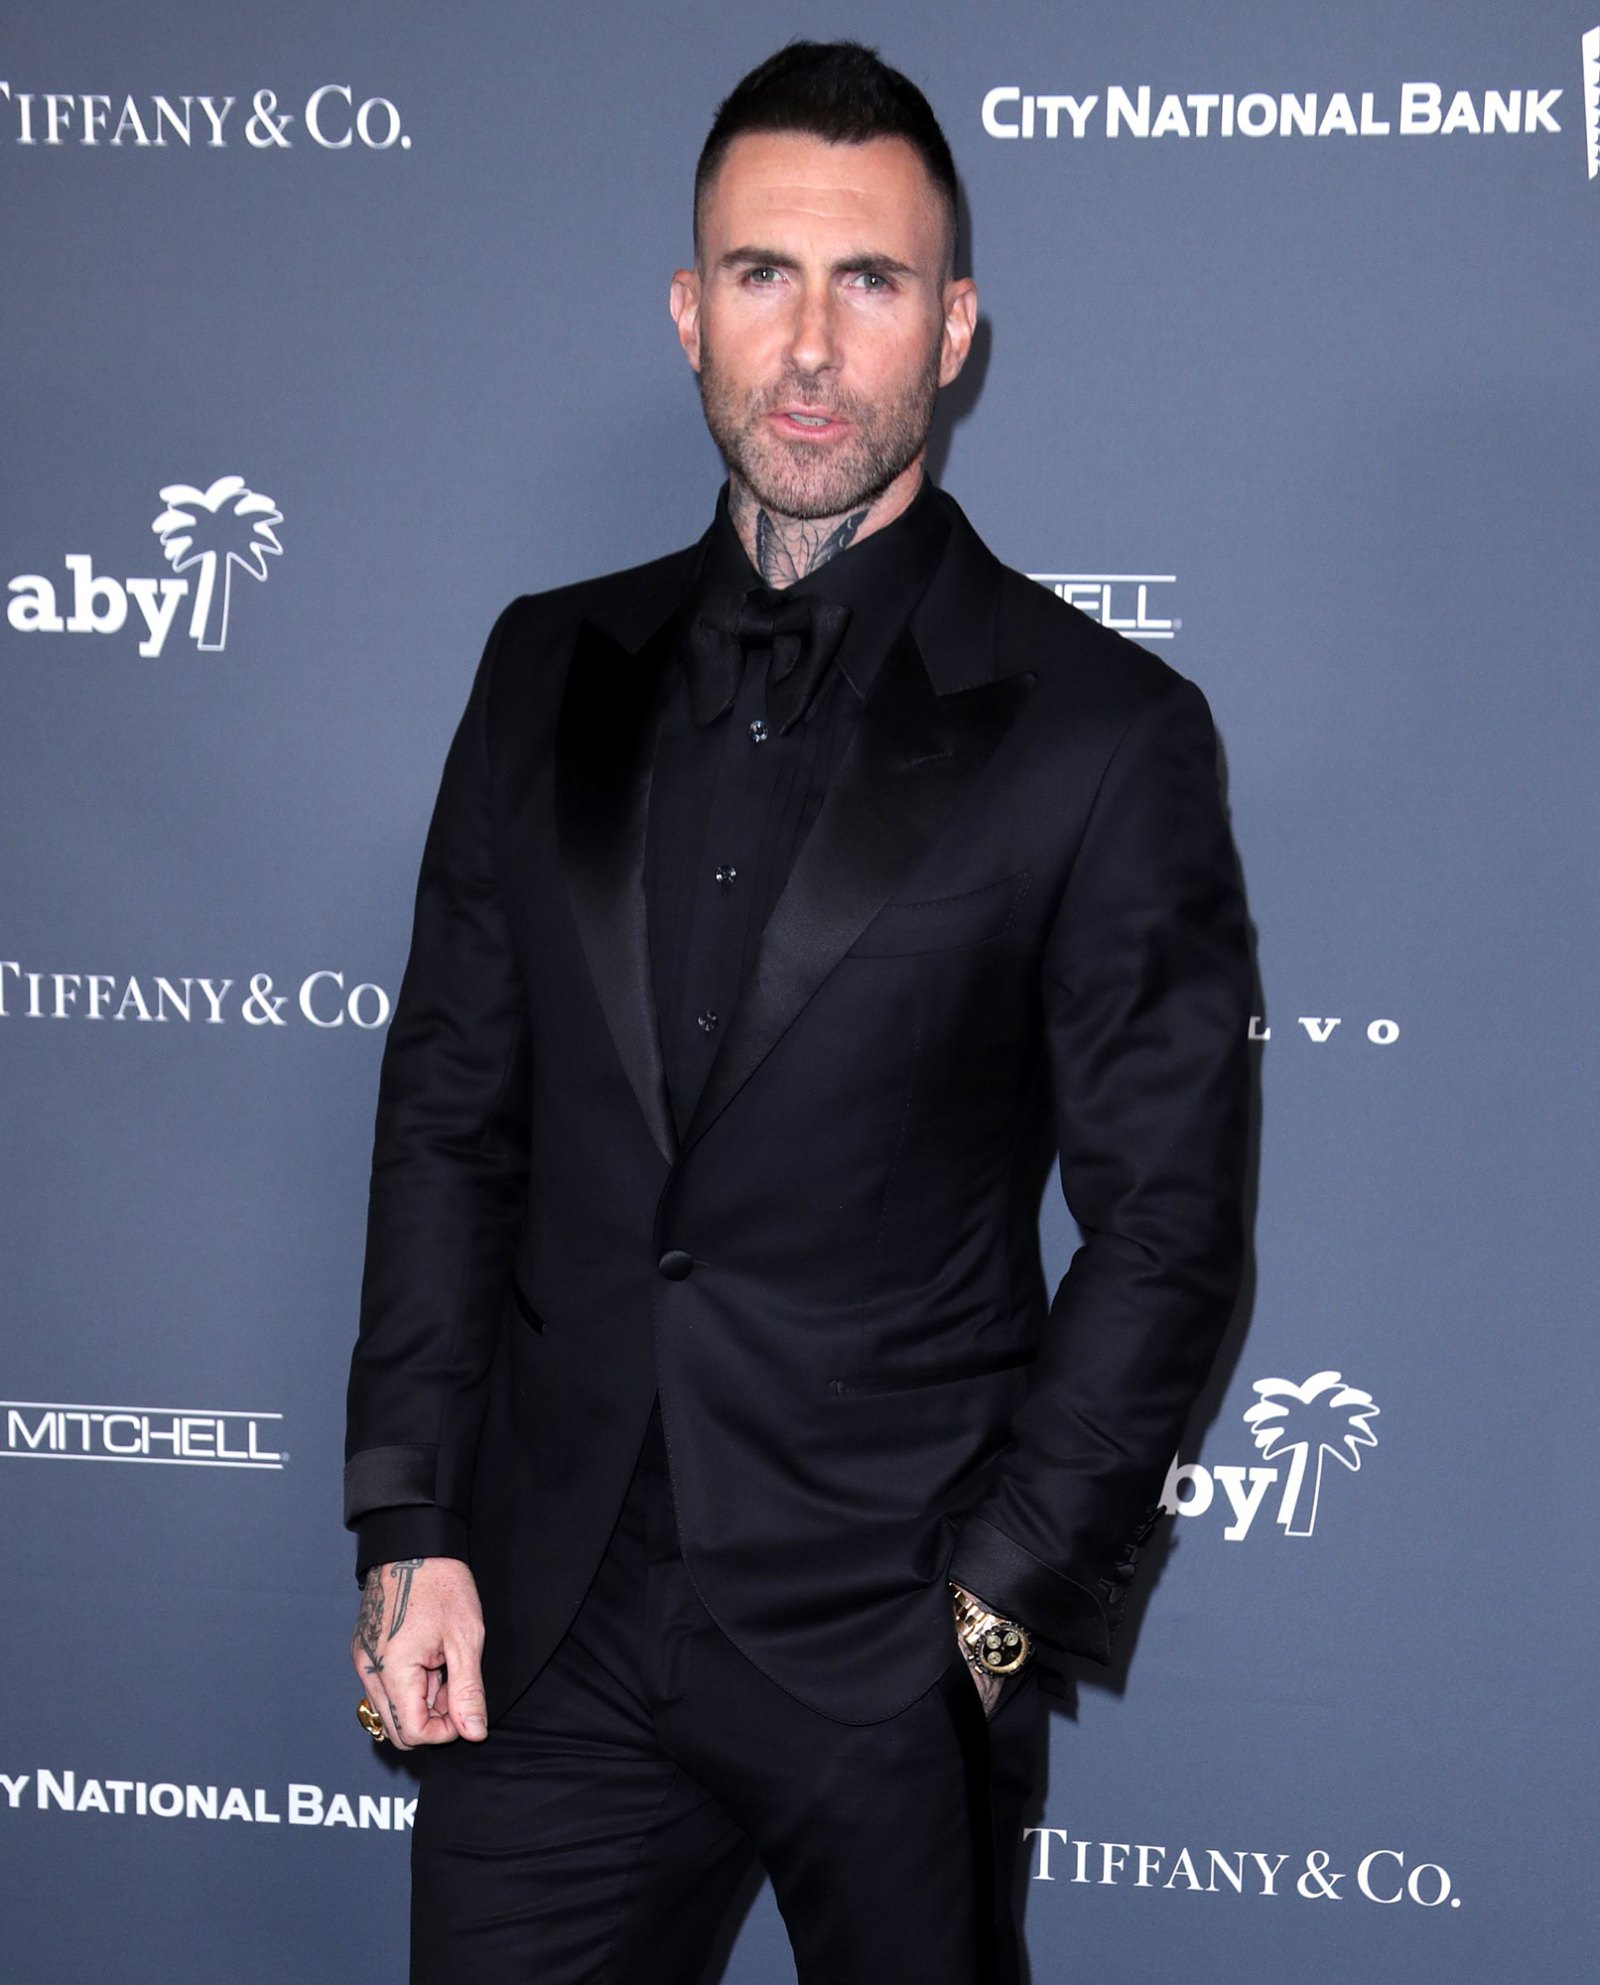 Adam Levine’s Dating History Before His 2014 Marriage to Behati Prinsloo